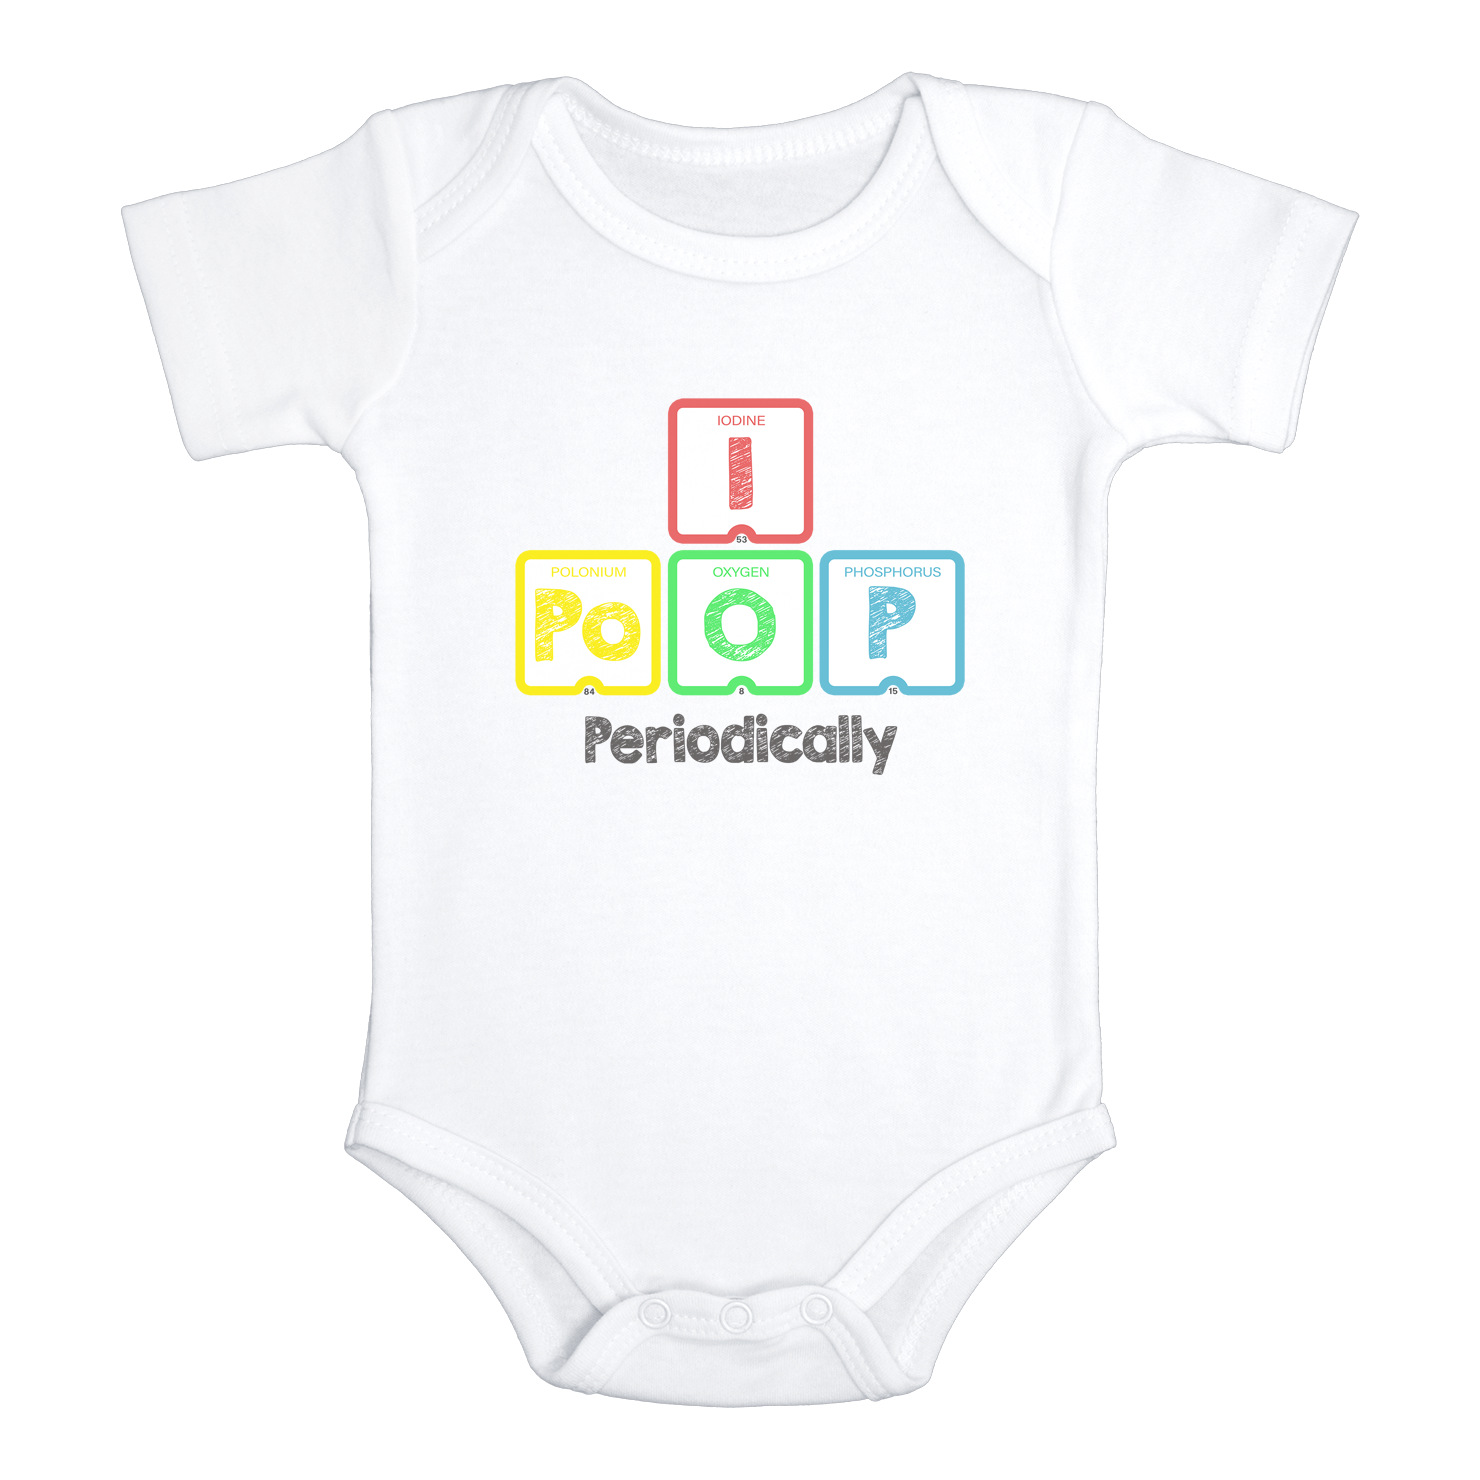 I POOP PERIODICALLY Funny Nerd Onesie Geek Baby Body Suit White - HappyAddition